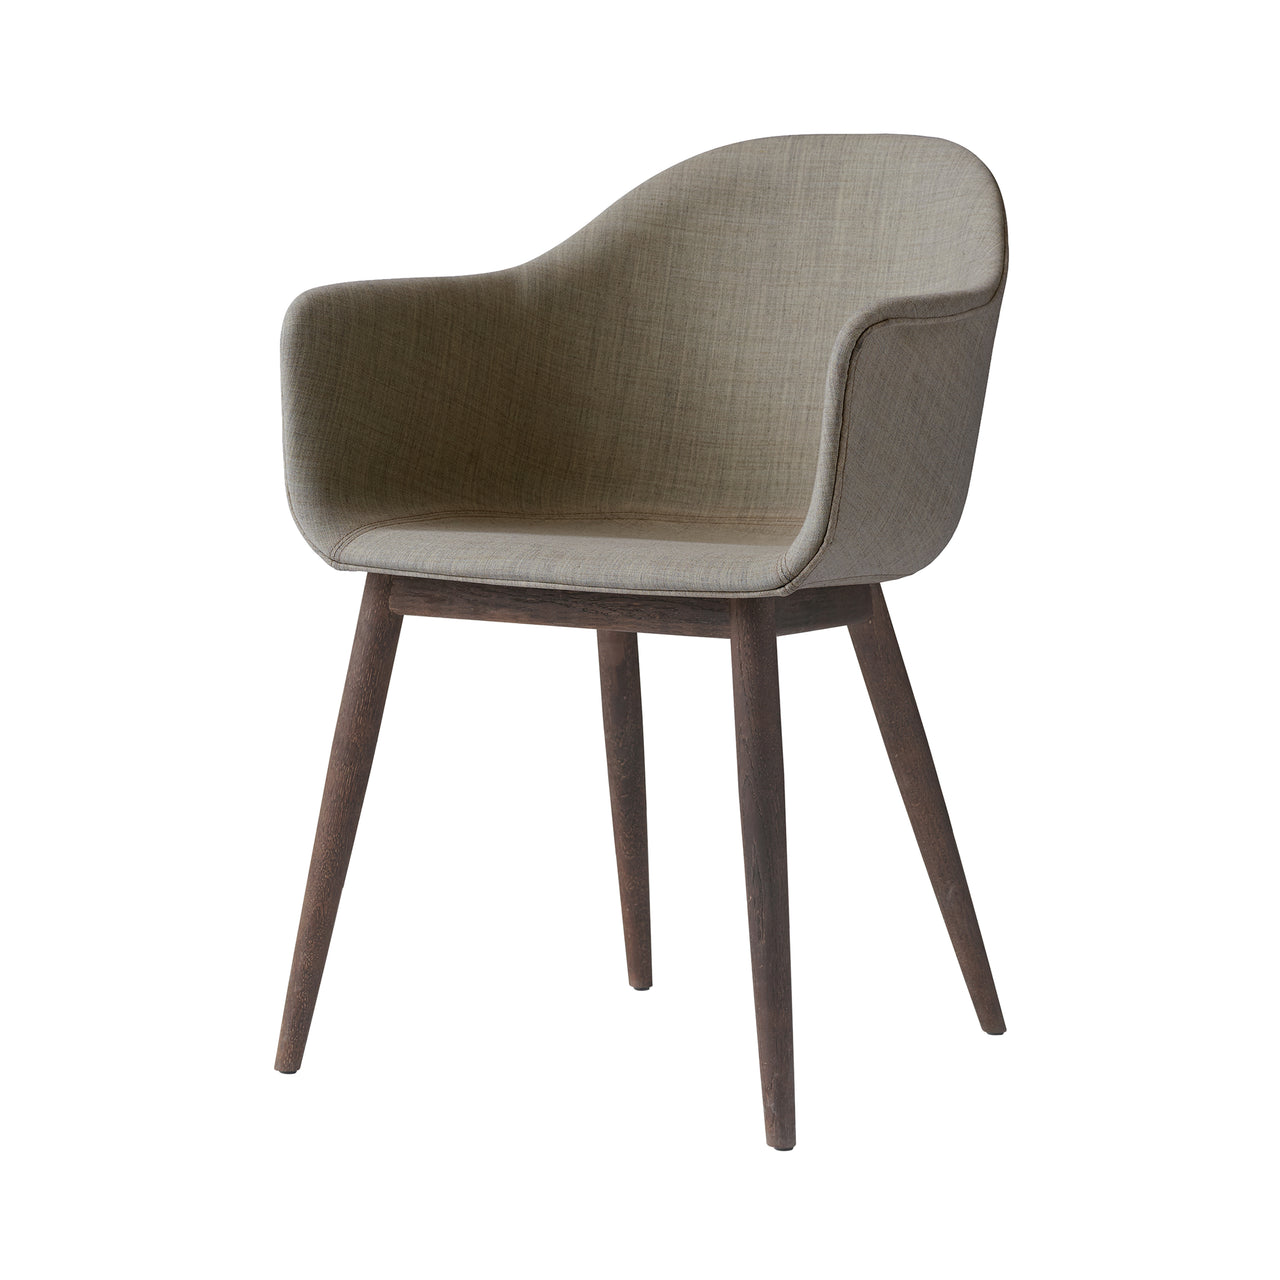 Harbour Dining Chair: Wood Base Upholstered + Dark Stained Oak + Remix3 233